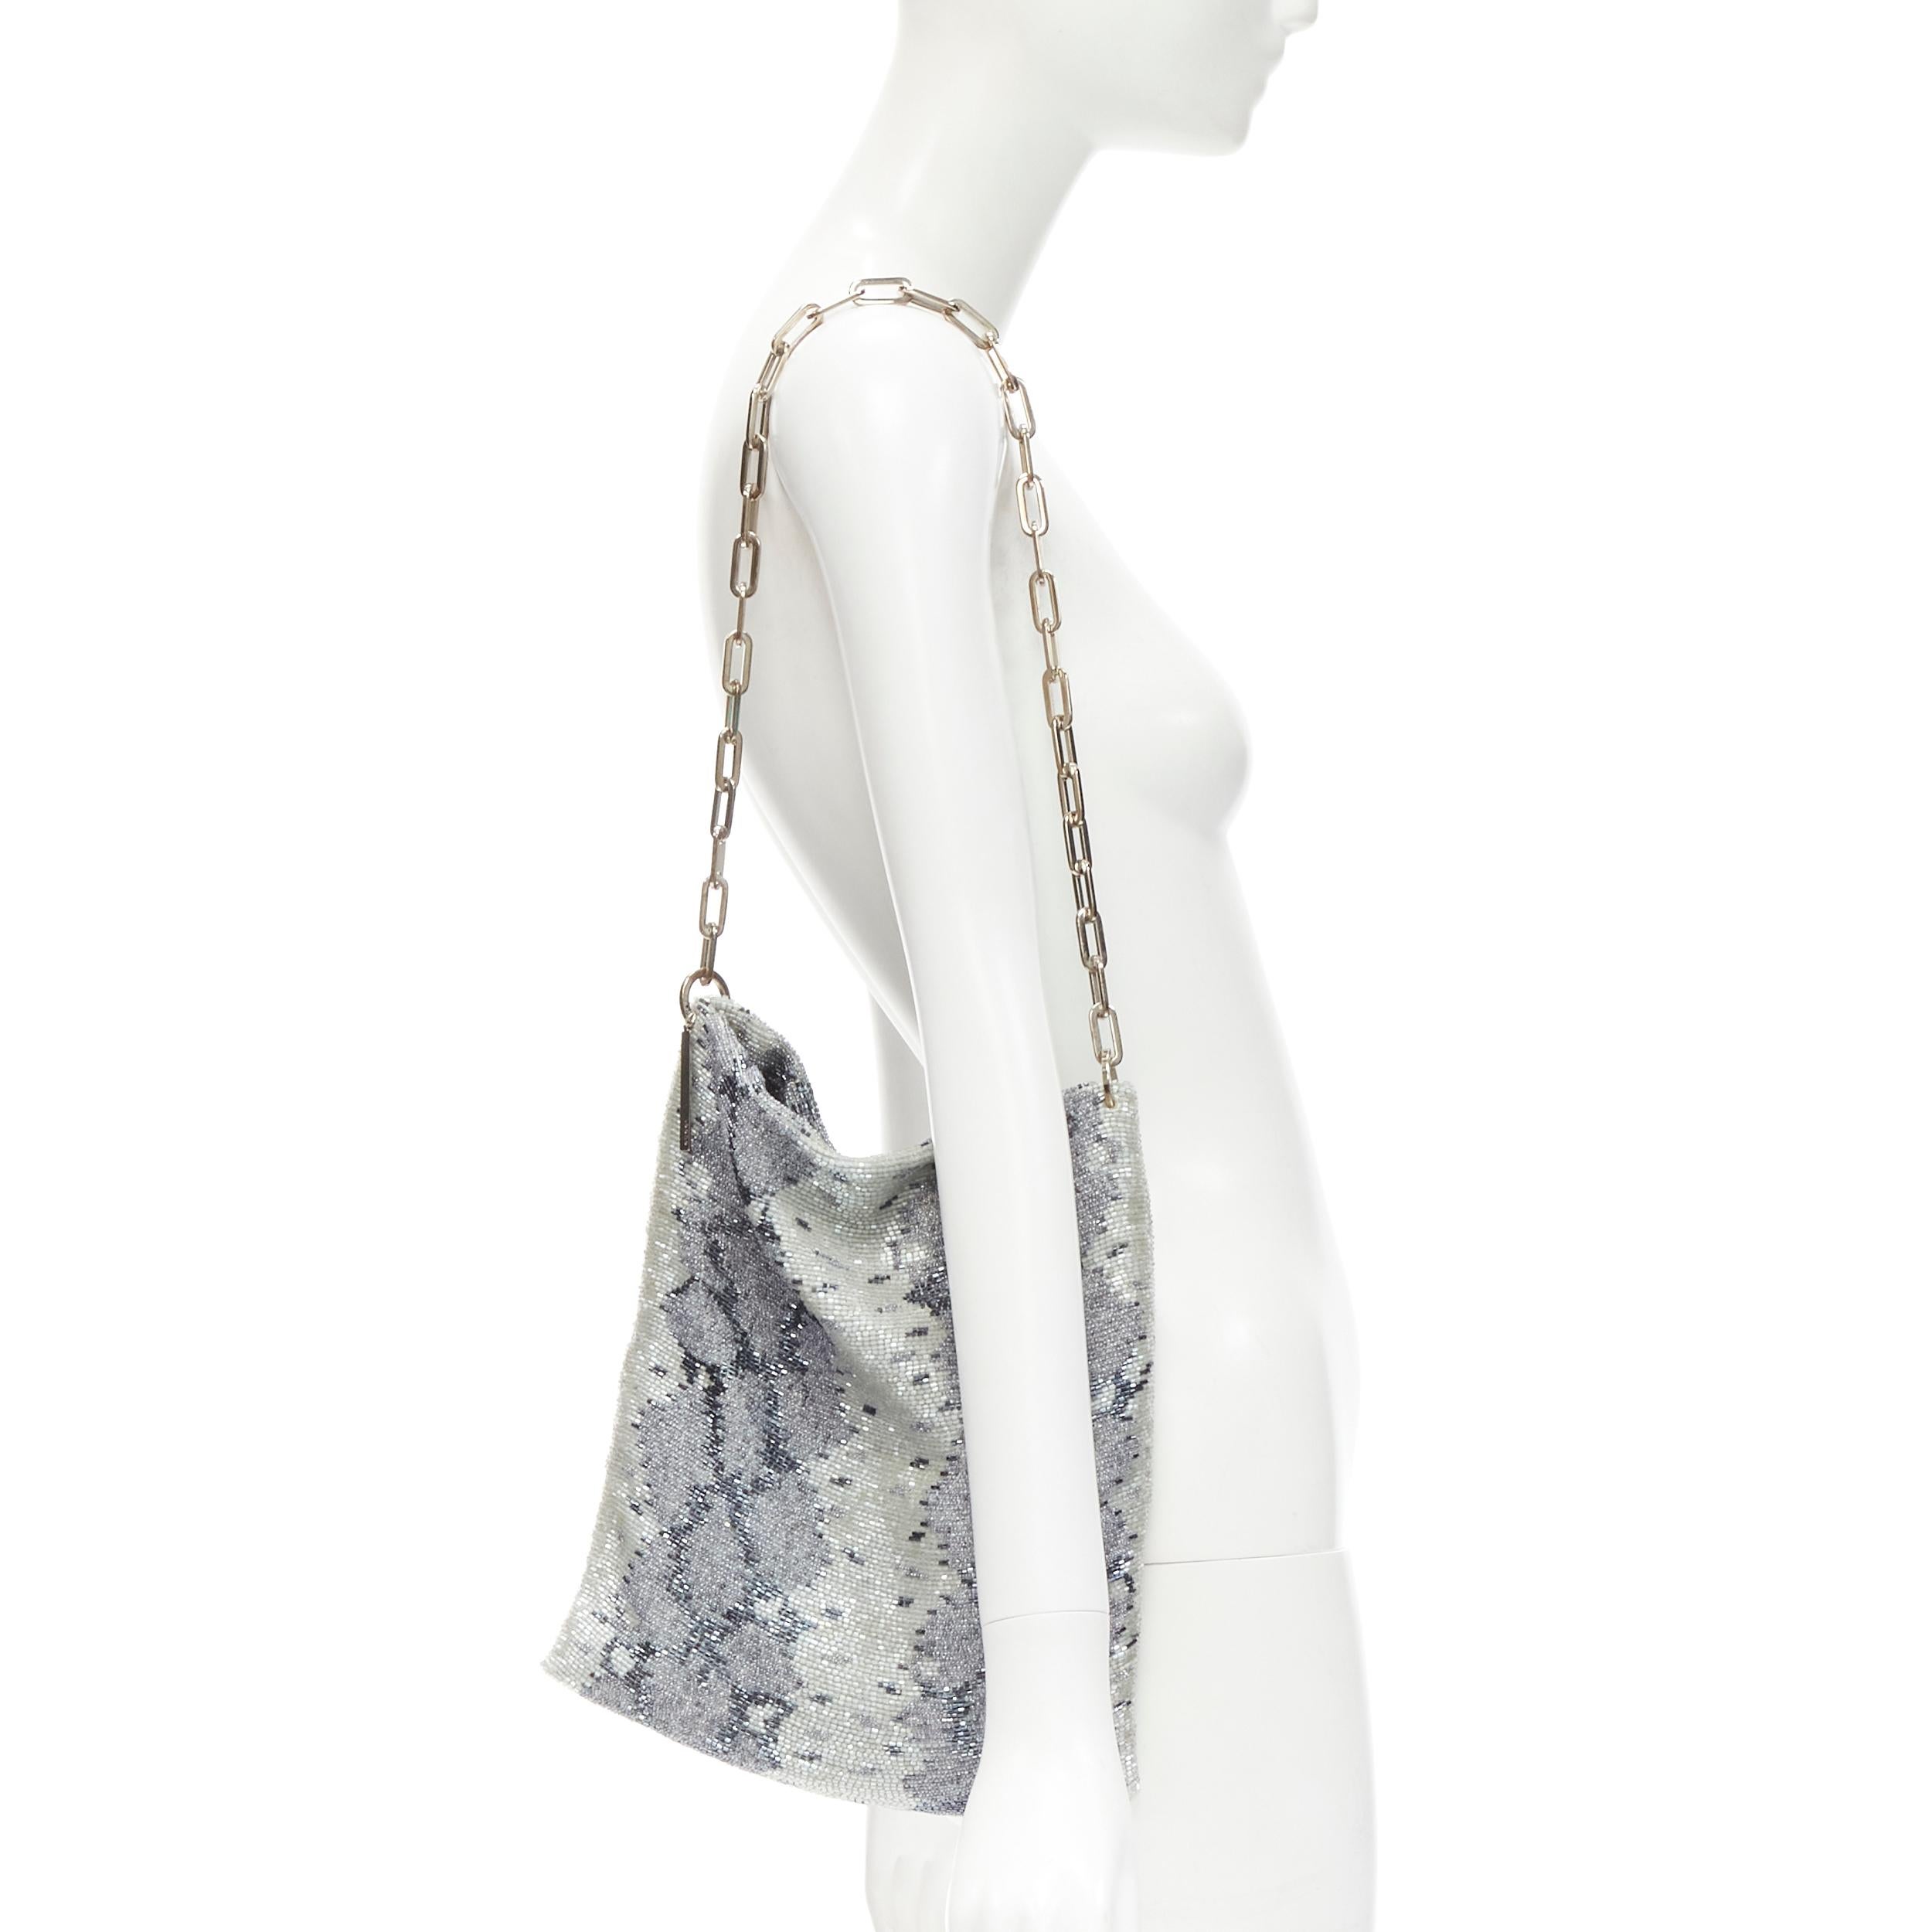 GUCCI TOM FORD Vintage blue grey python bead embellished silver chain bag
Brand: Gucci
Designer: Tom Ford
Model: 001 4328 2684
Material: Fabric
Color: Blue
Pattern: Animal Print
Closure: Open Top
Extra Detail: Grey and silver python design fully